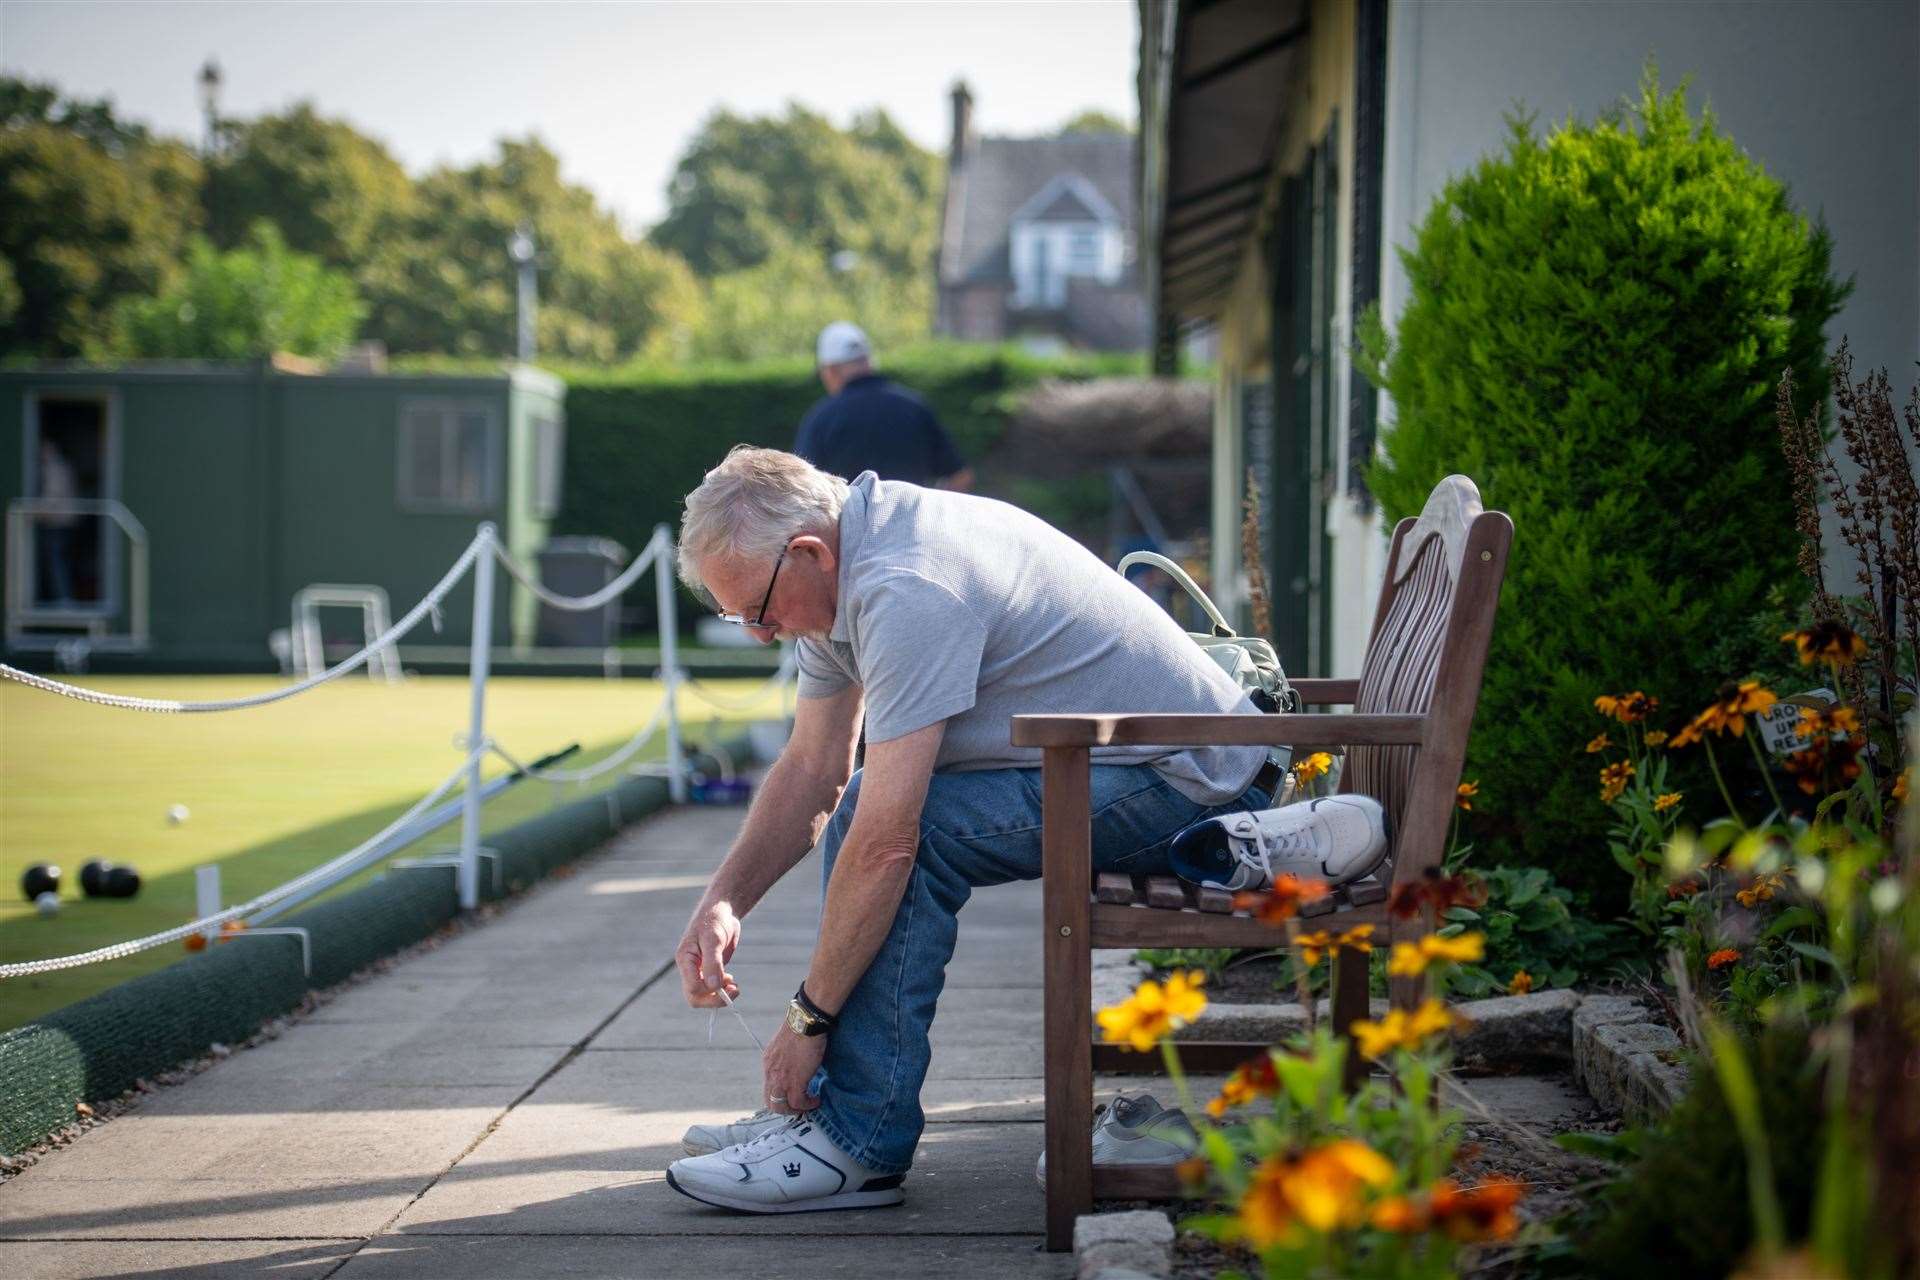 Getting ready for a game of bowls. Picture: Callum Mackay..